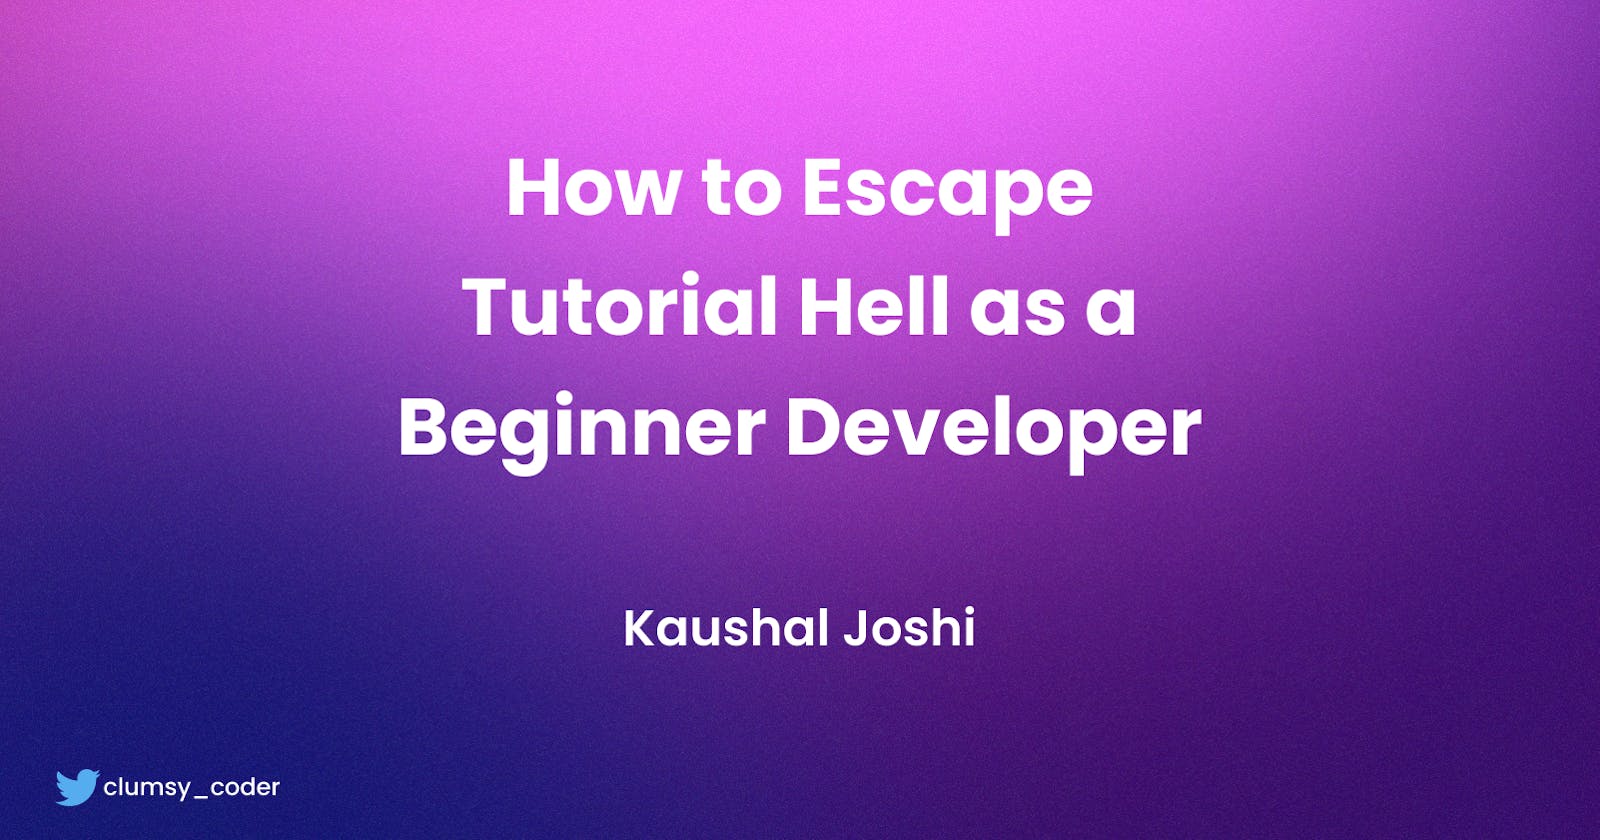 How to Escape Tutorial Hell as a Beginner Developer